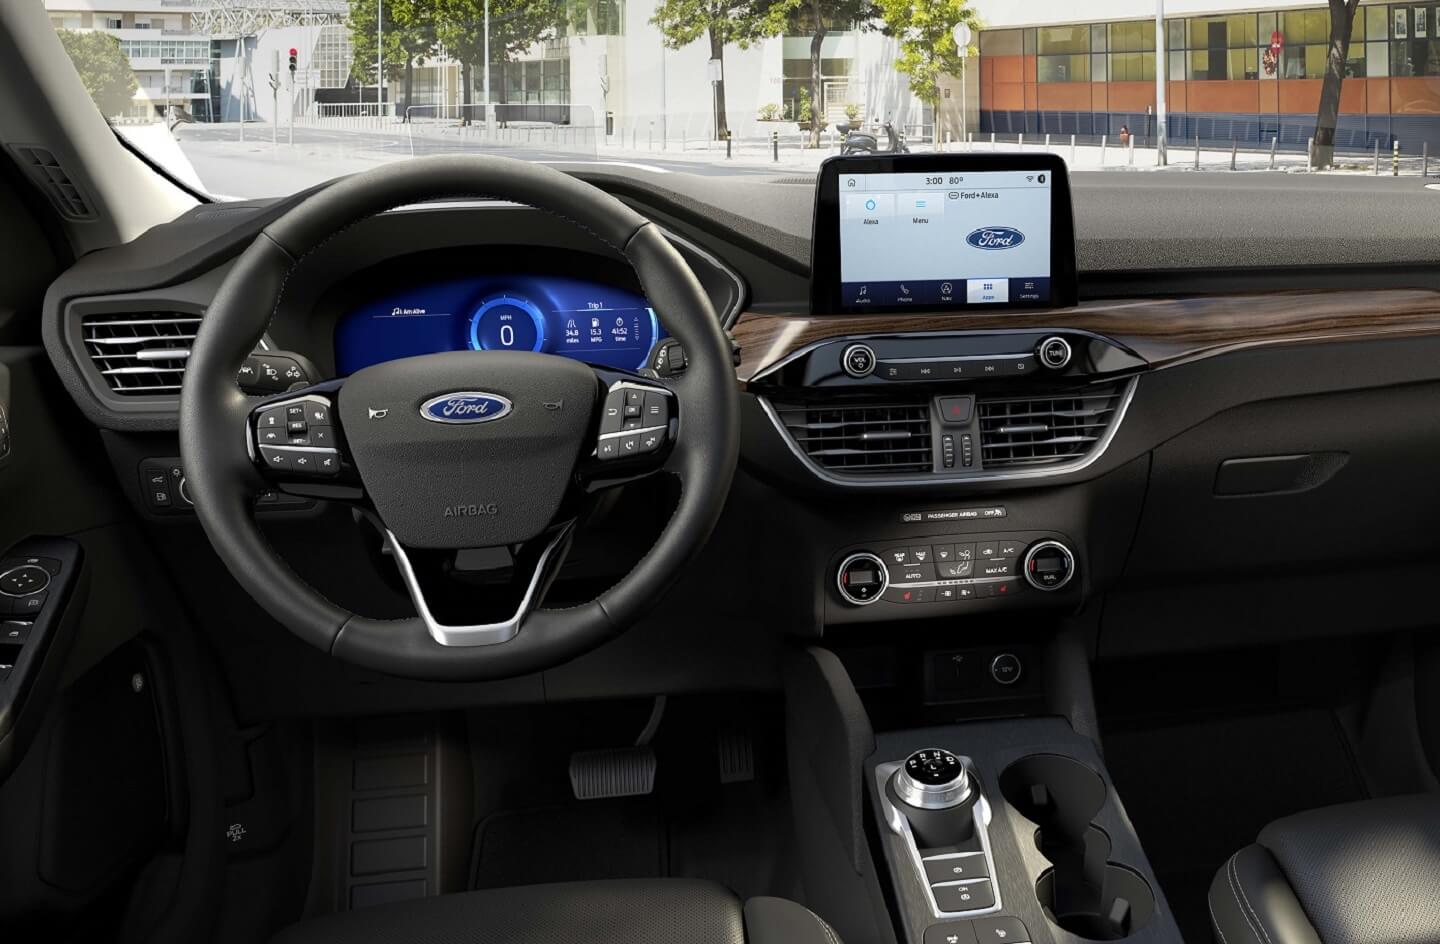 Ford Escape Interior Review Los Angeles CA Airport Marina Ford